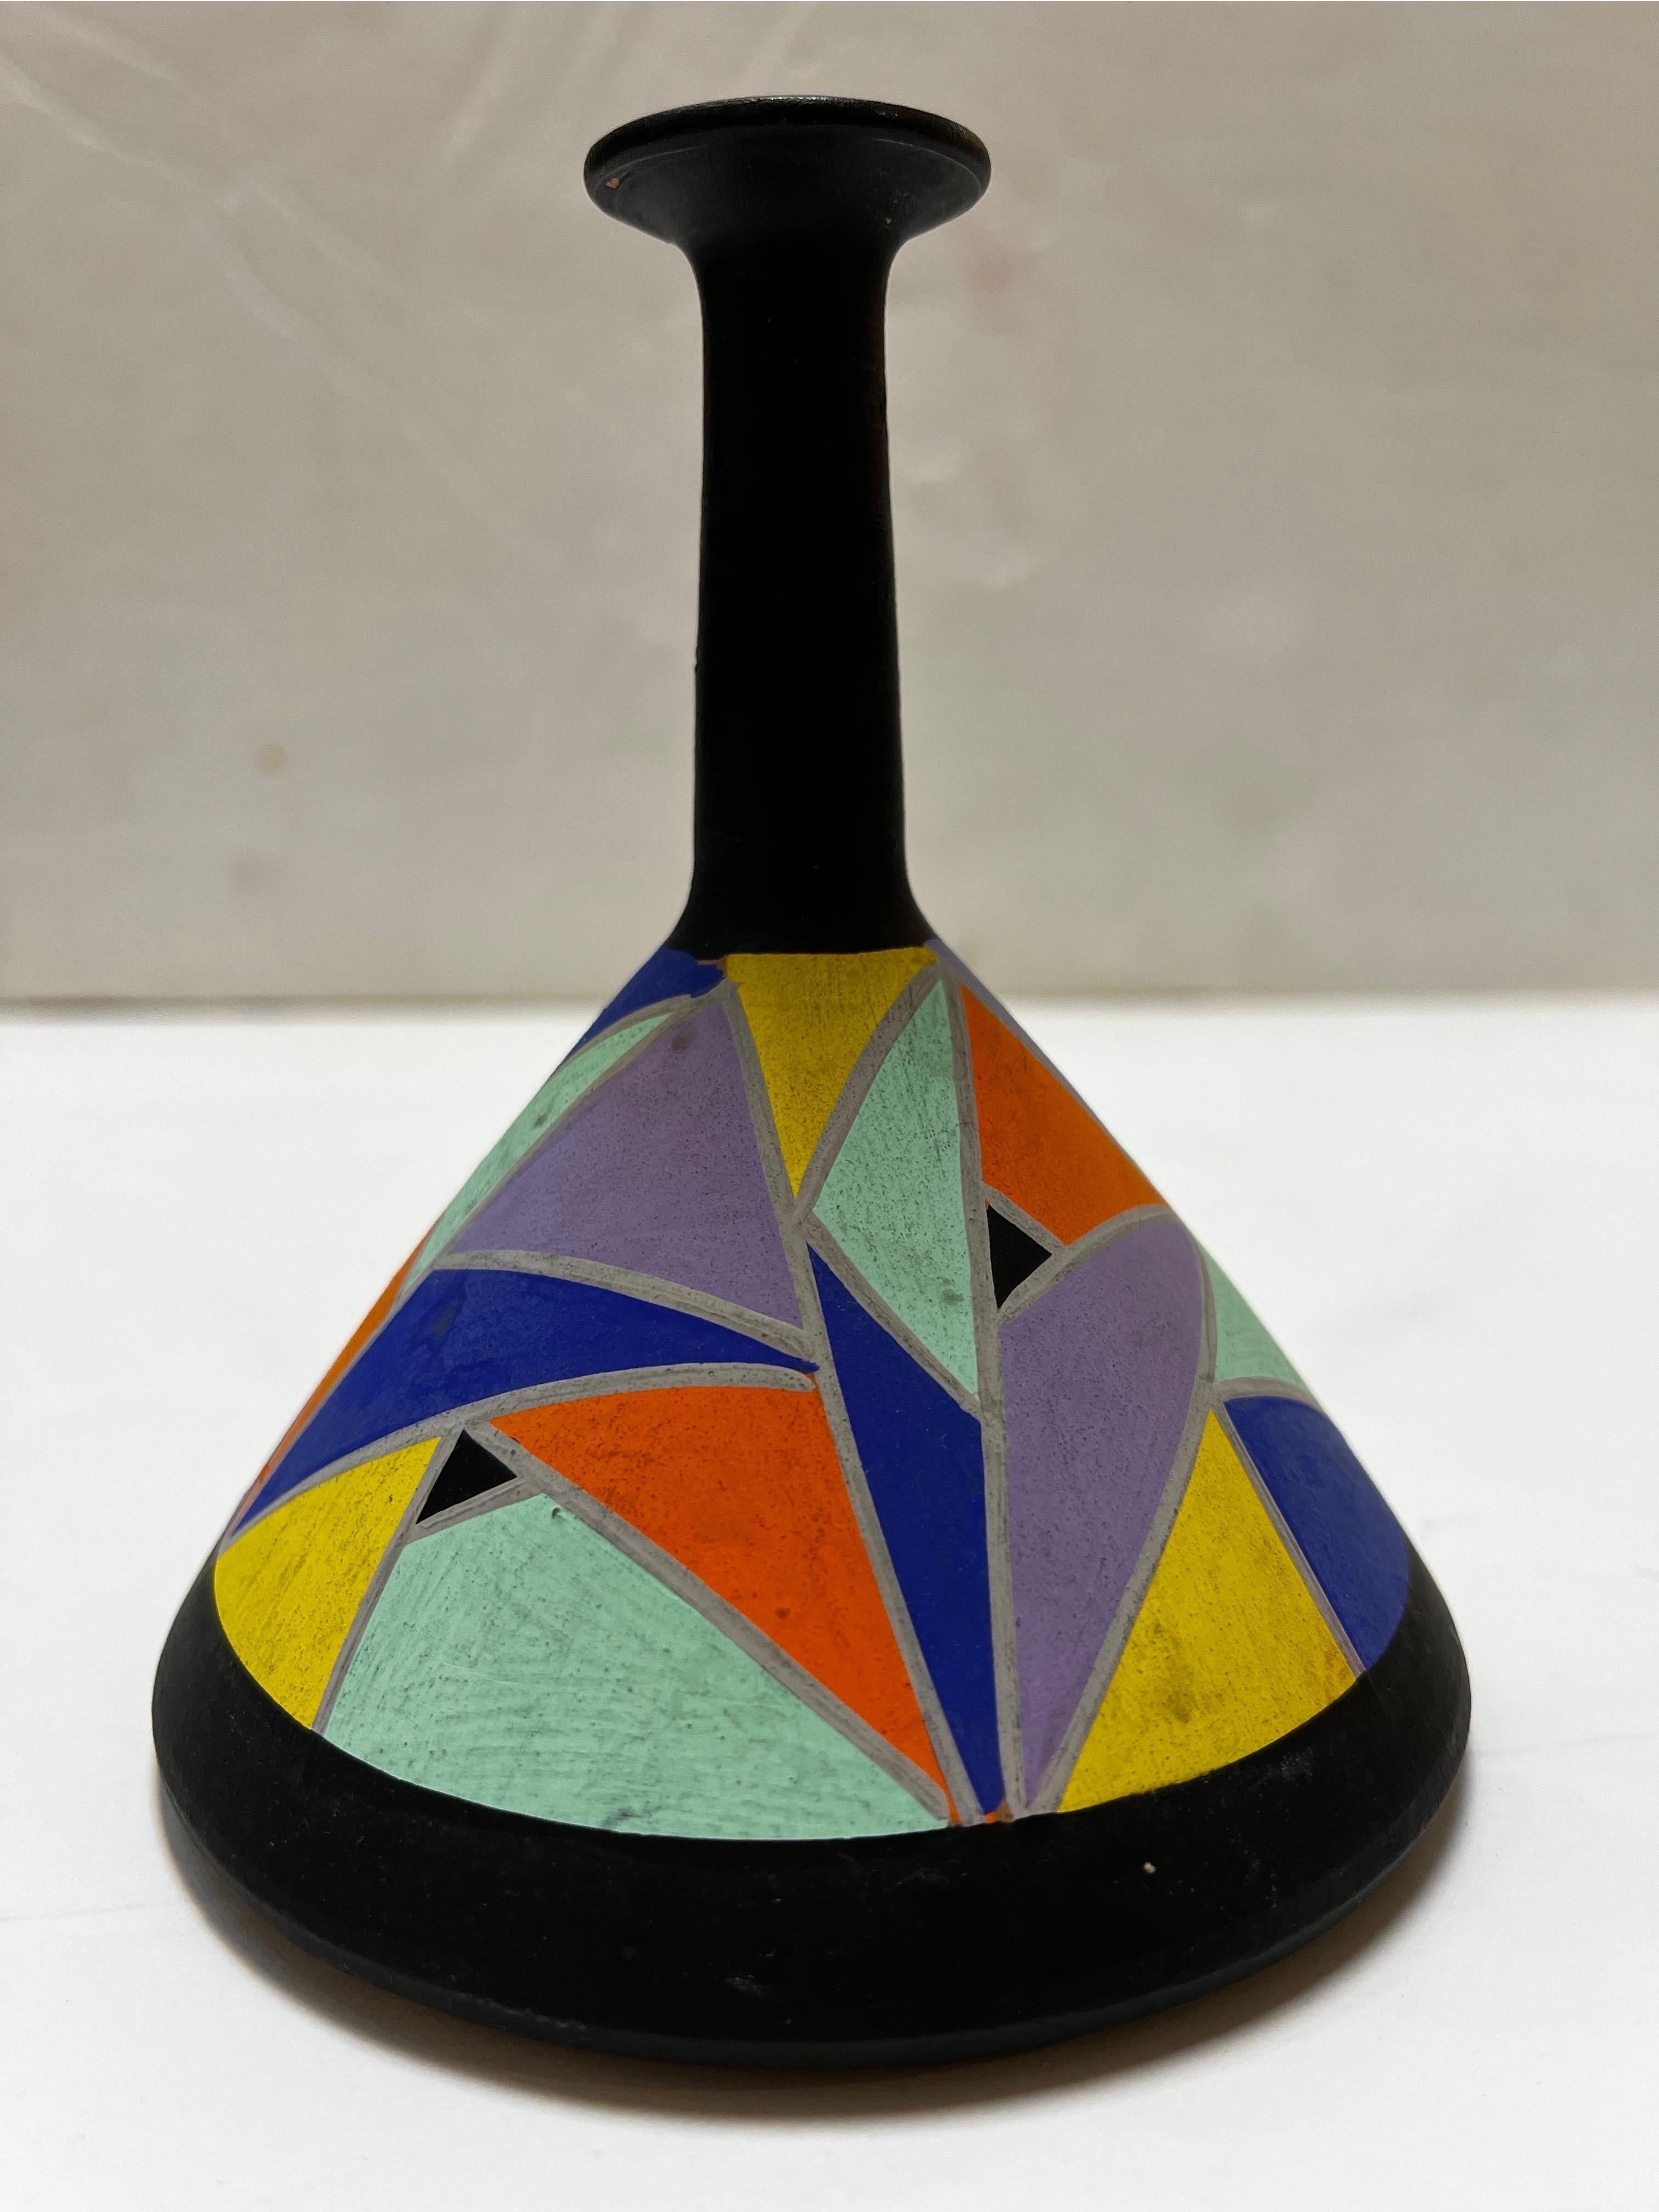 A vintage circa 1980's or 1990's hand painted pottery vase. The bold, geometric and Modernist style decoration is presented in full color against a black painted counterpoint. The conical base is accentuated by a slender elongated neck capped by the